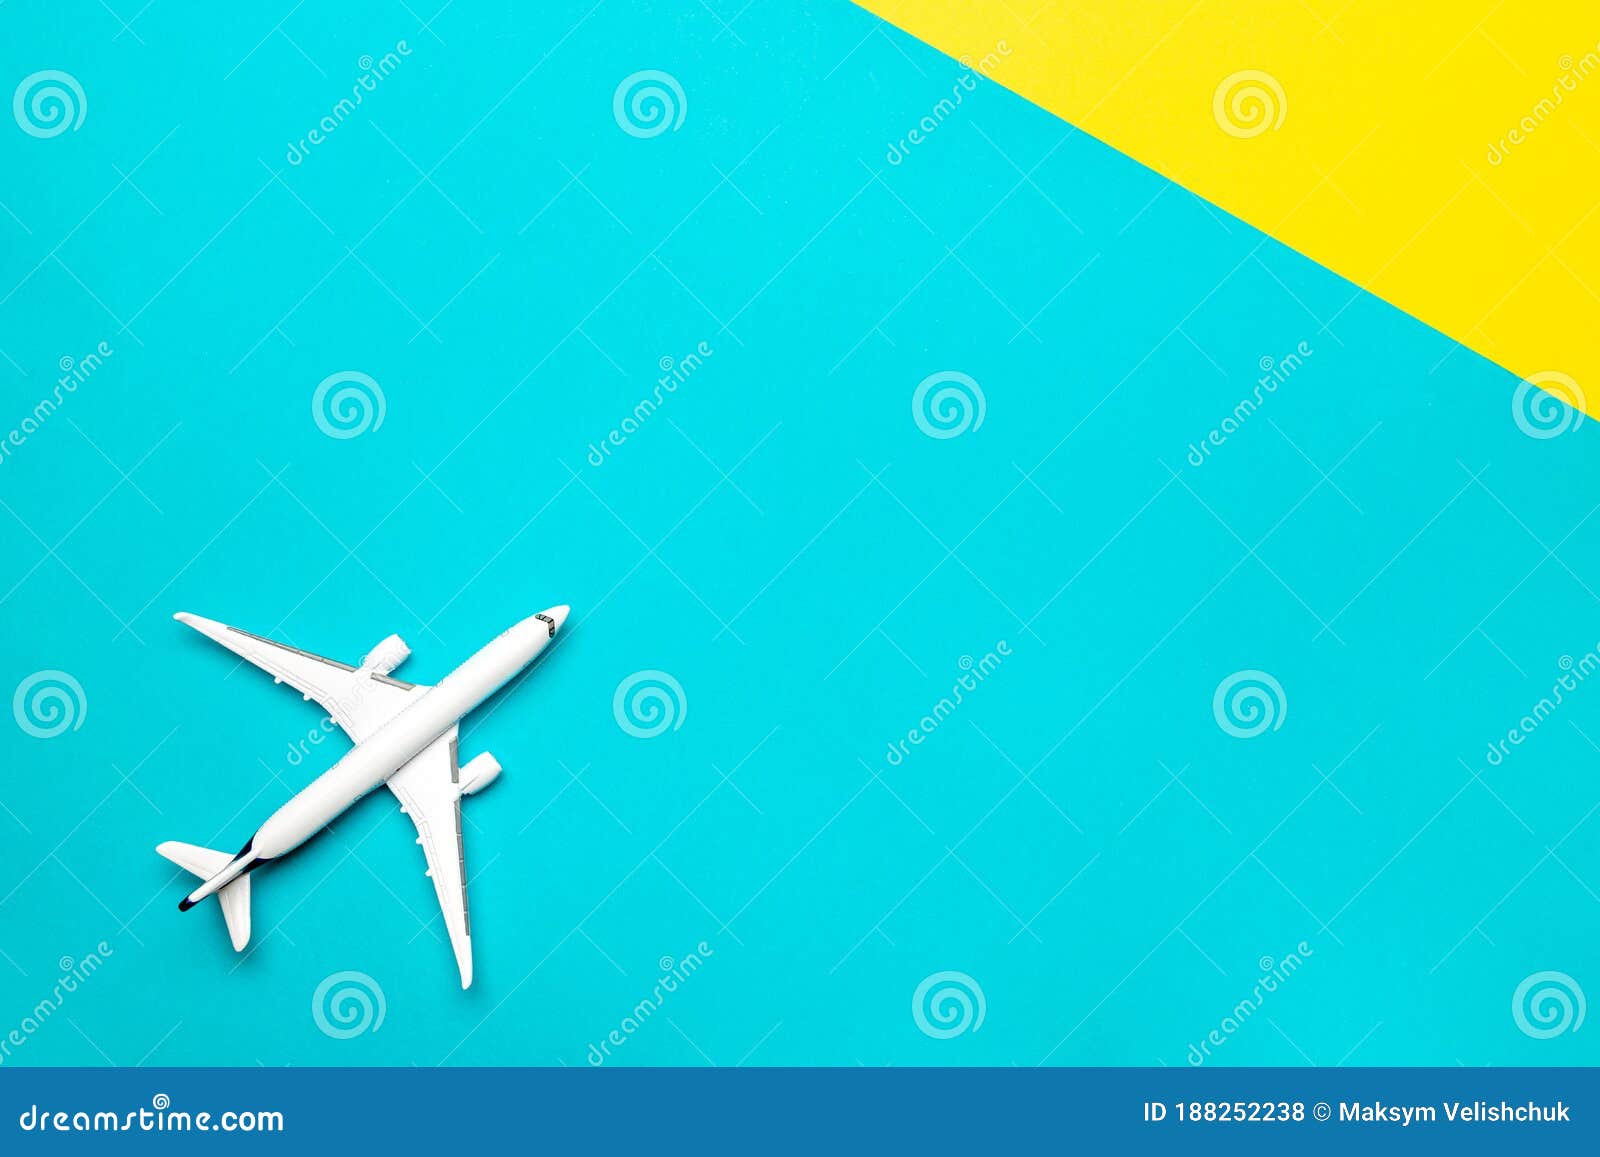 Yellow paper plane abstract vector background isolated background. Simple  modern banner, wallpaper, web, cover. 4601107 Vector Art at Vecteezy